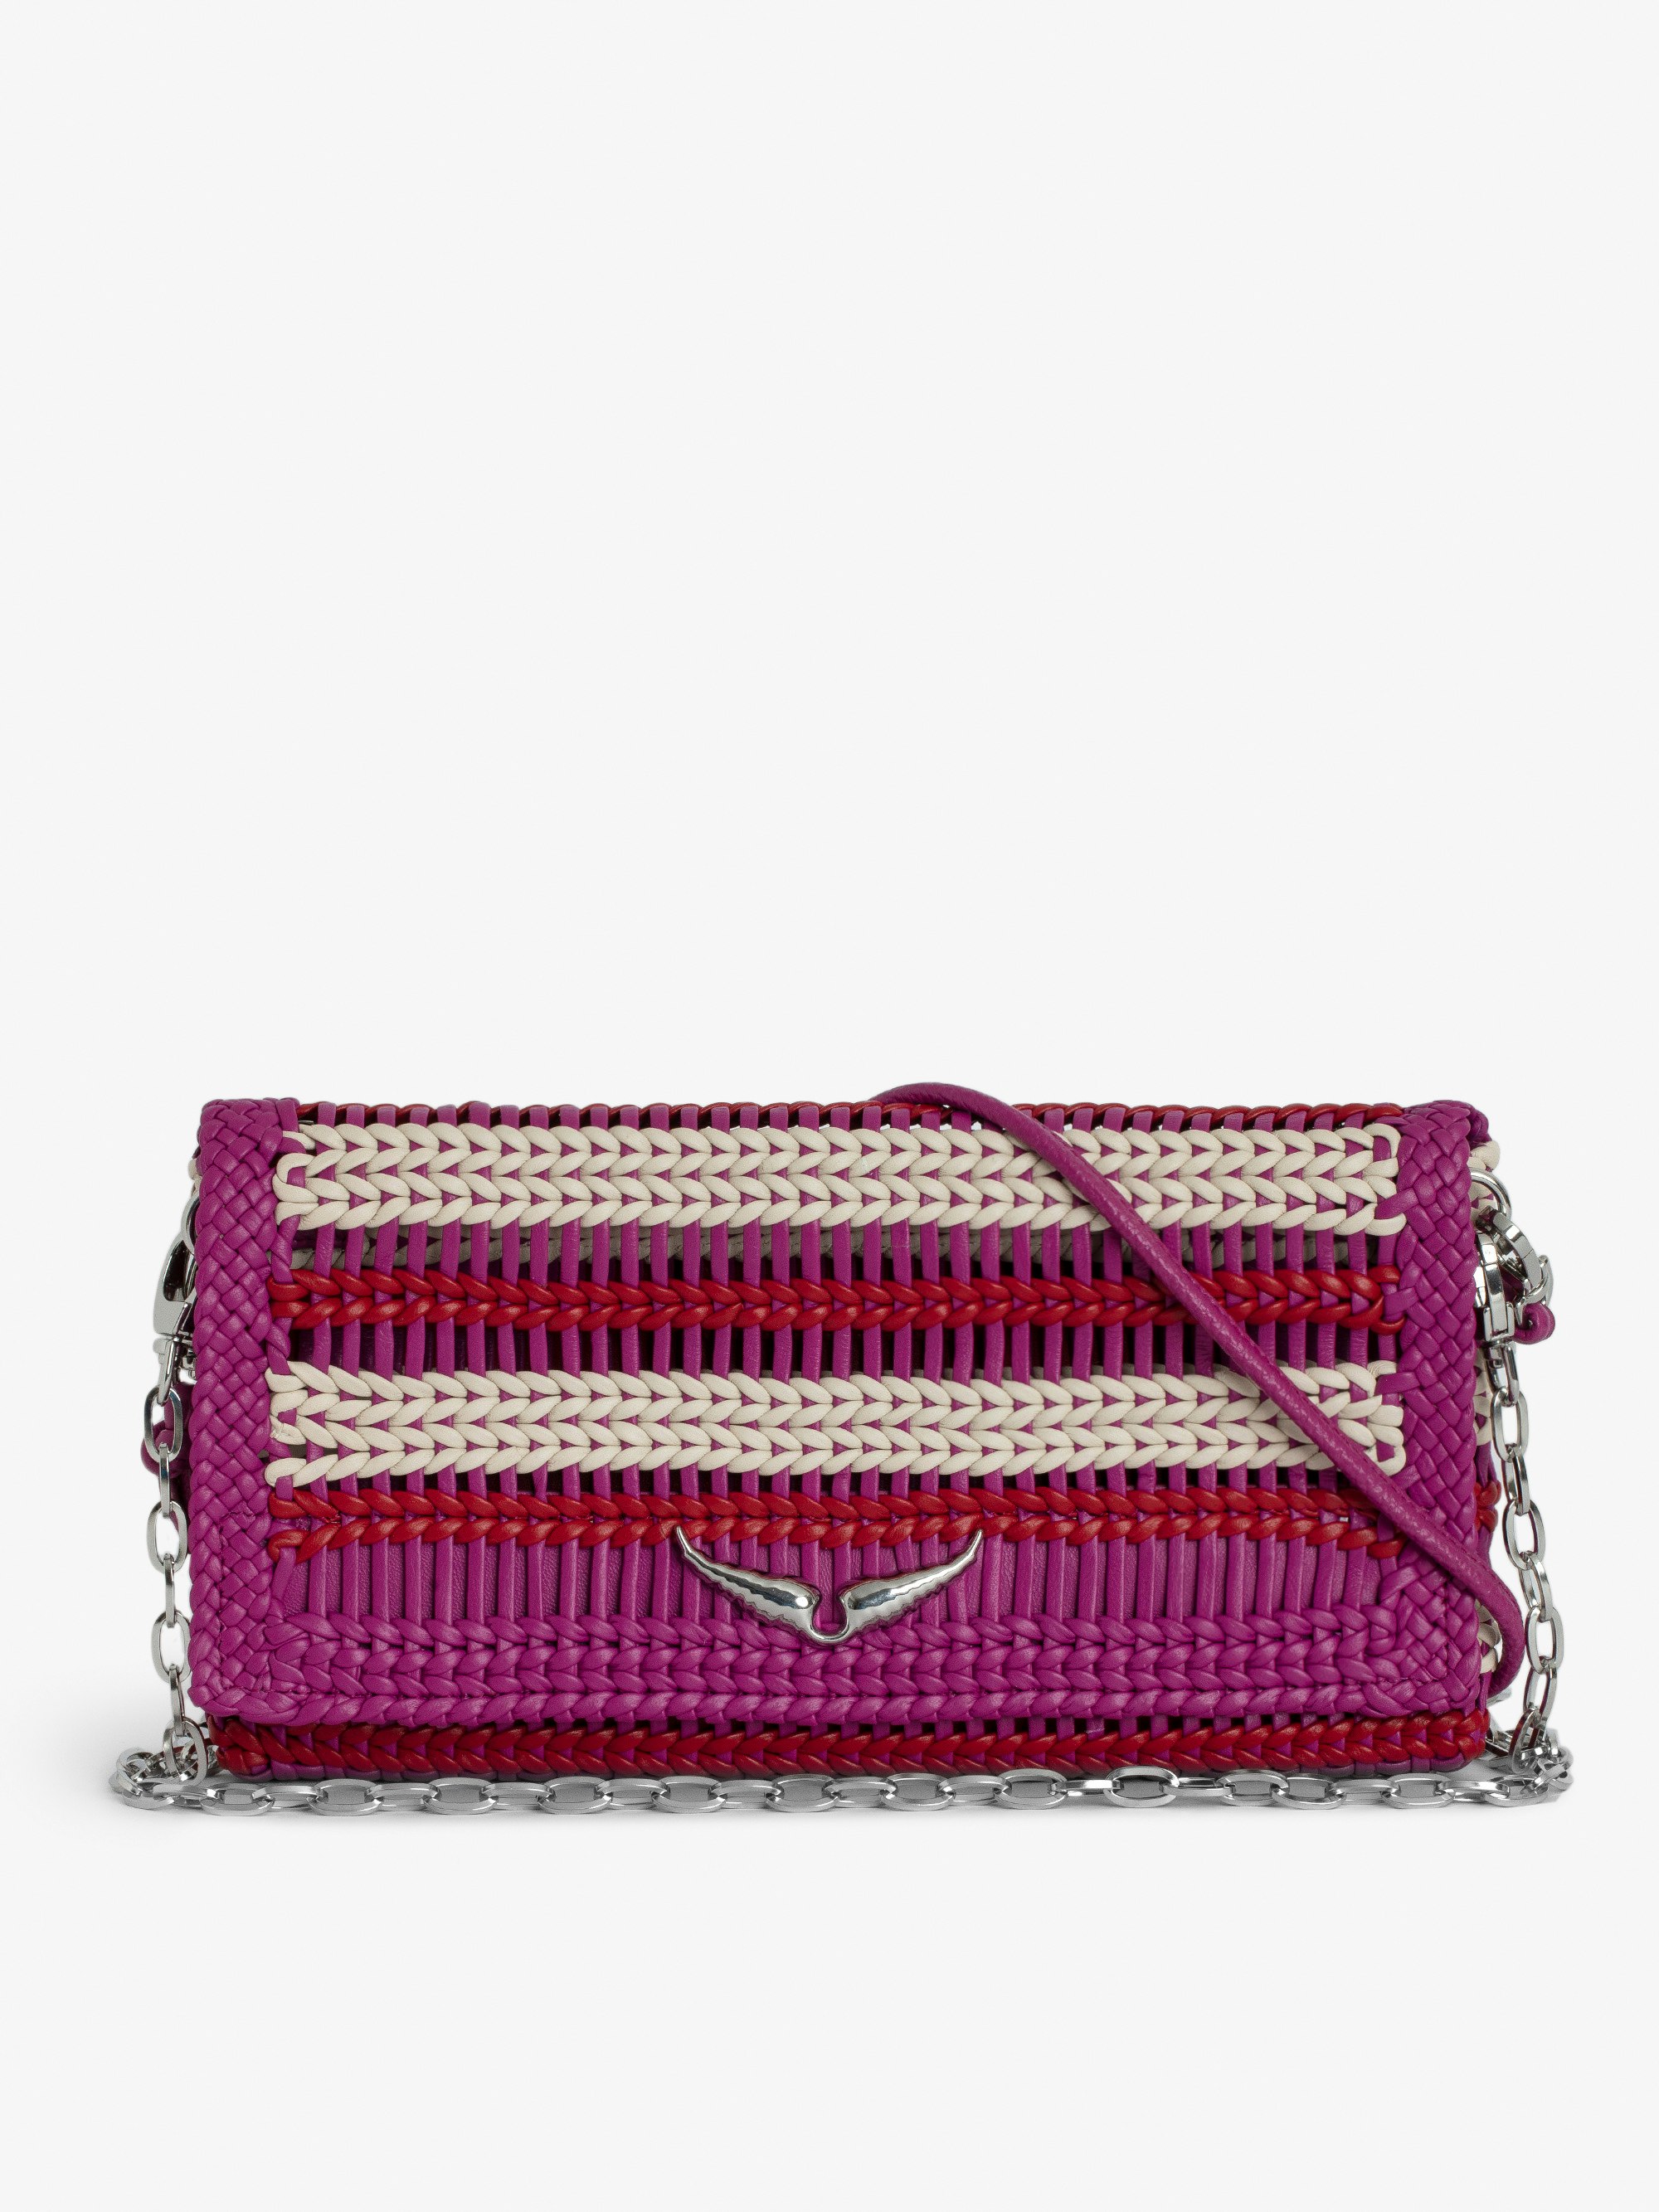 Rock Eternal Clutch - Women’s fuchsia braided leather clutch with tied shoulder strap, chain and wings.